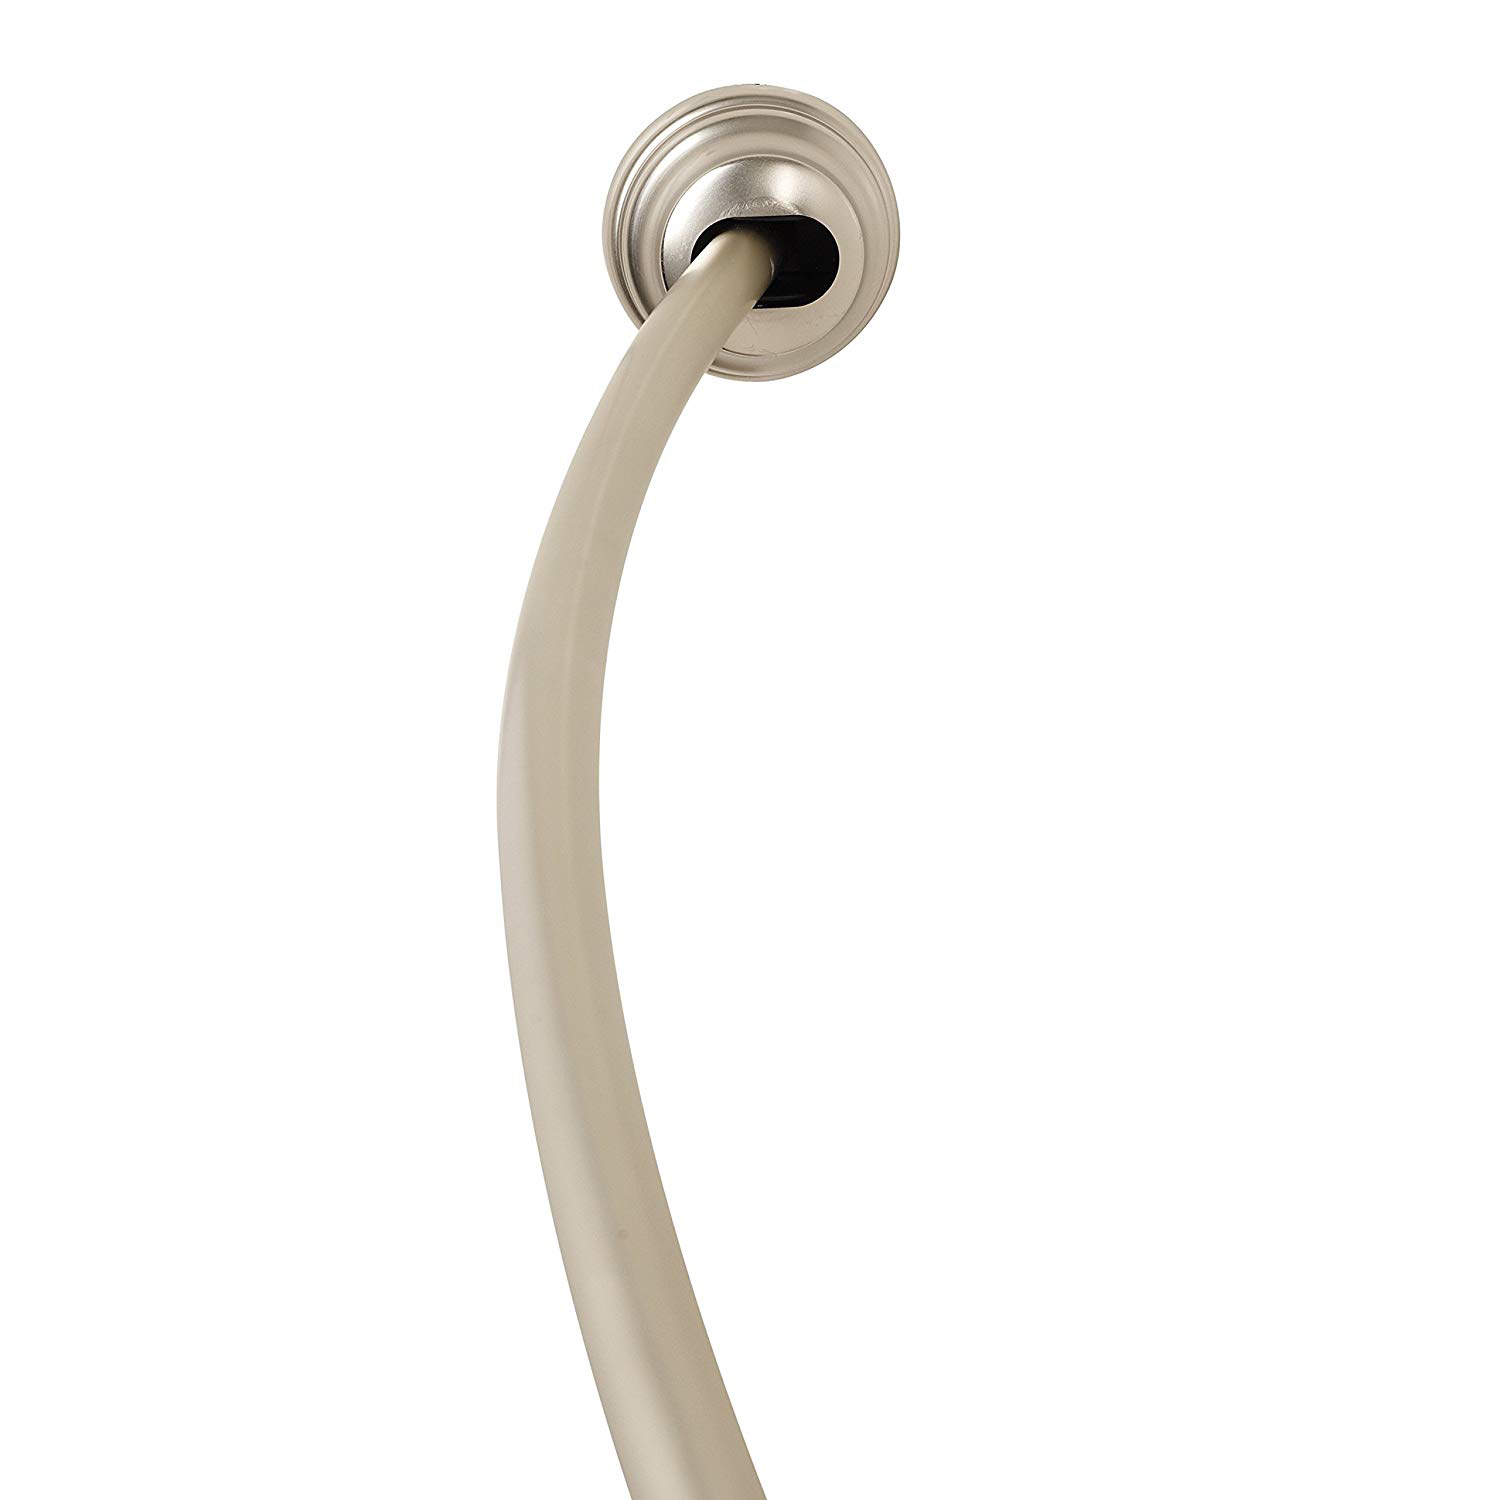 NeverRust Aluminum 50-72" Tension Curved Shower Rod in Nickel